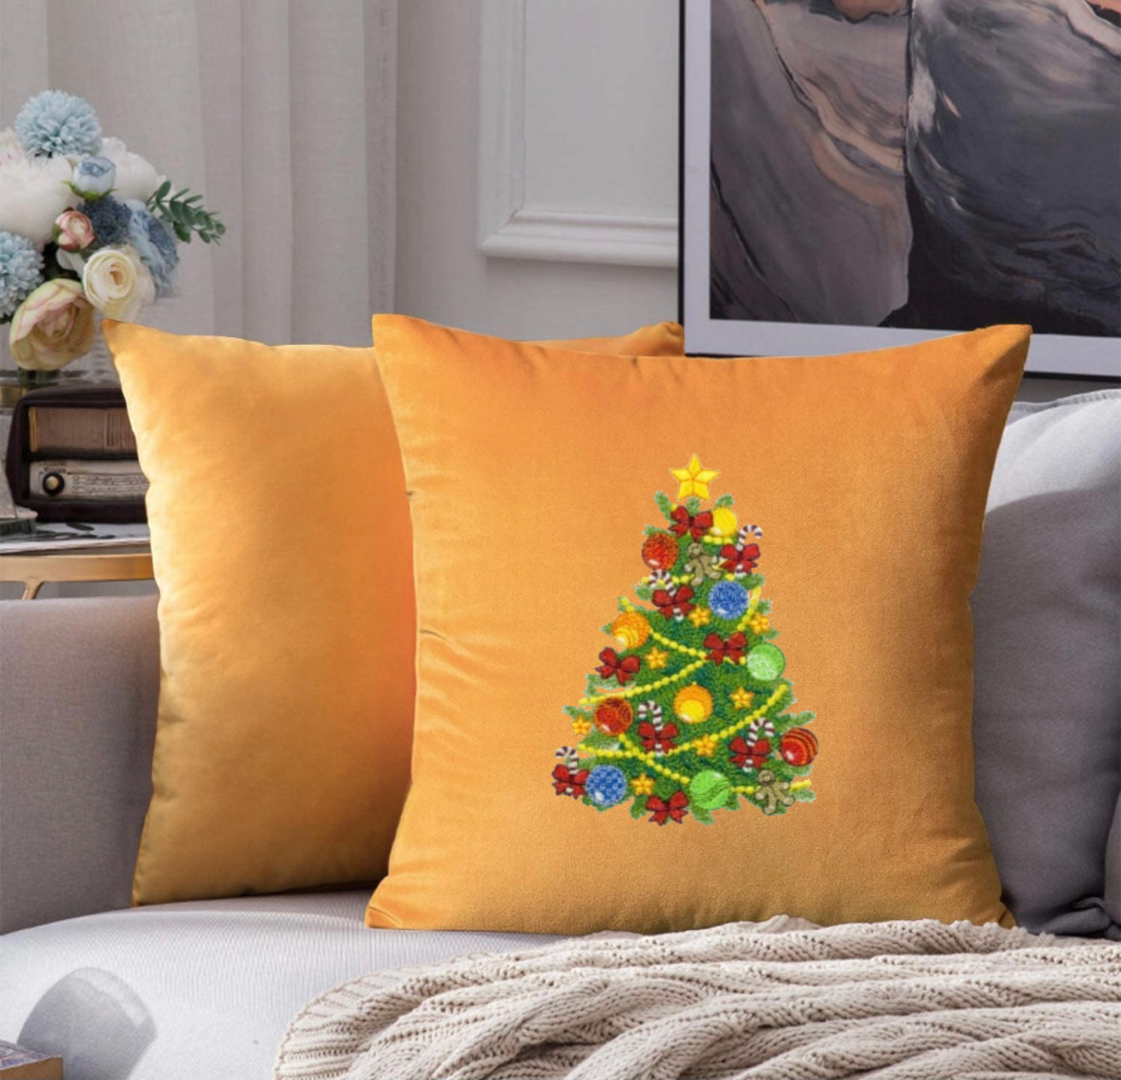 Christmas Tree Embroidered Throw Pillow Cover 18" x 18” Cotton or Velvet Accent Pillow Cover Zip Closure.